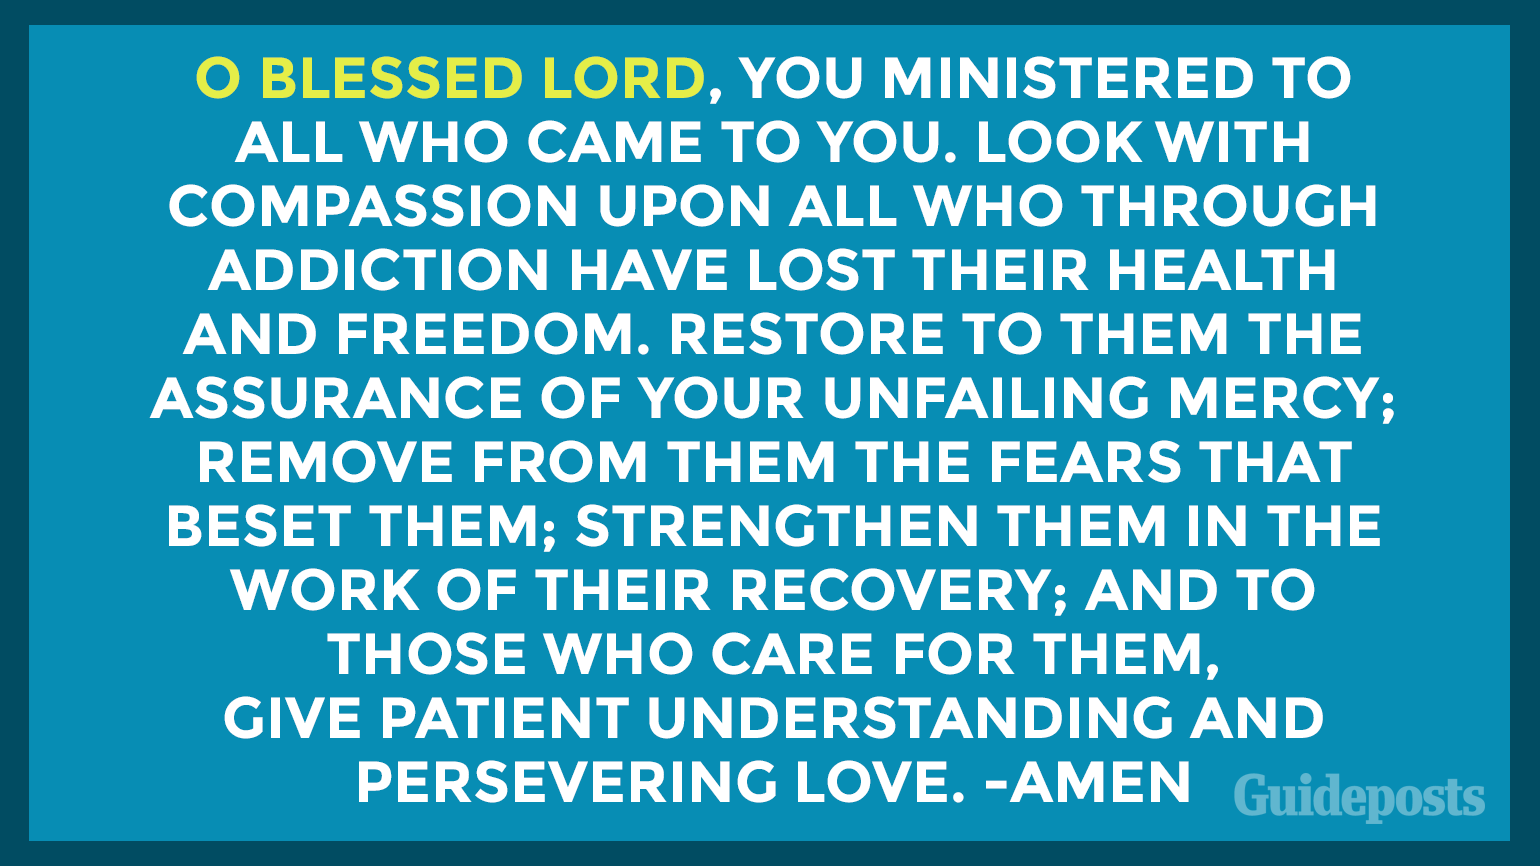 O blessed Lord, You ministered to all who came to You. Look with compassion upon all who through addiction have lost  their health and freedom. Restore to them the assurance of  Your unfailing mercy; remove from them the fears that beset  them; strengthen them in the work of their recovery; and to  those who care for them, give patient understanding and  persevering love. Amen.